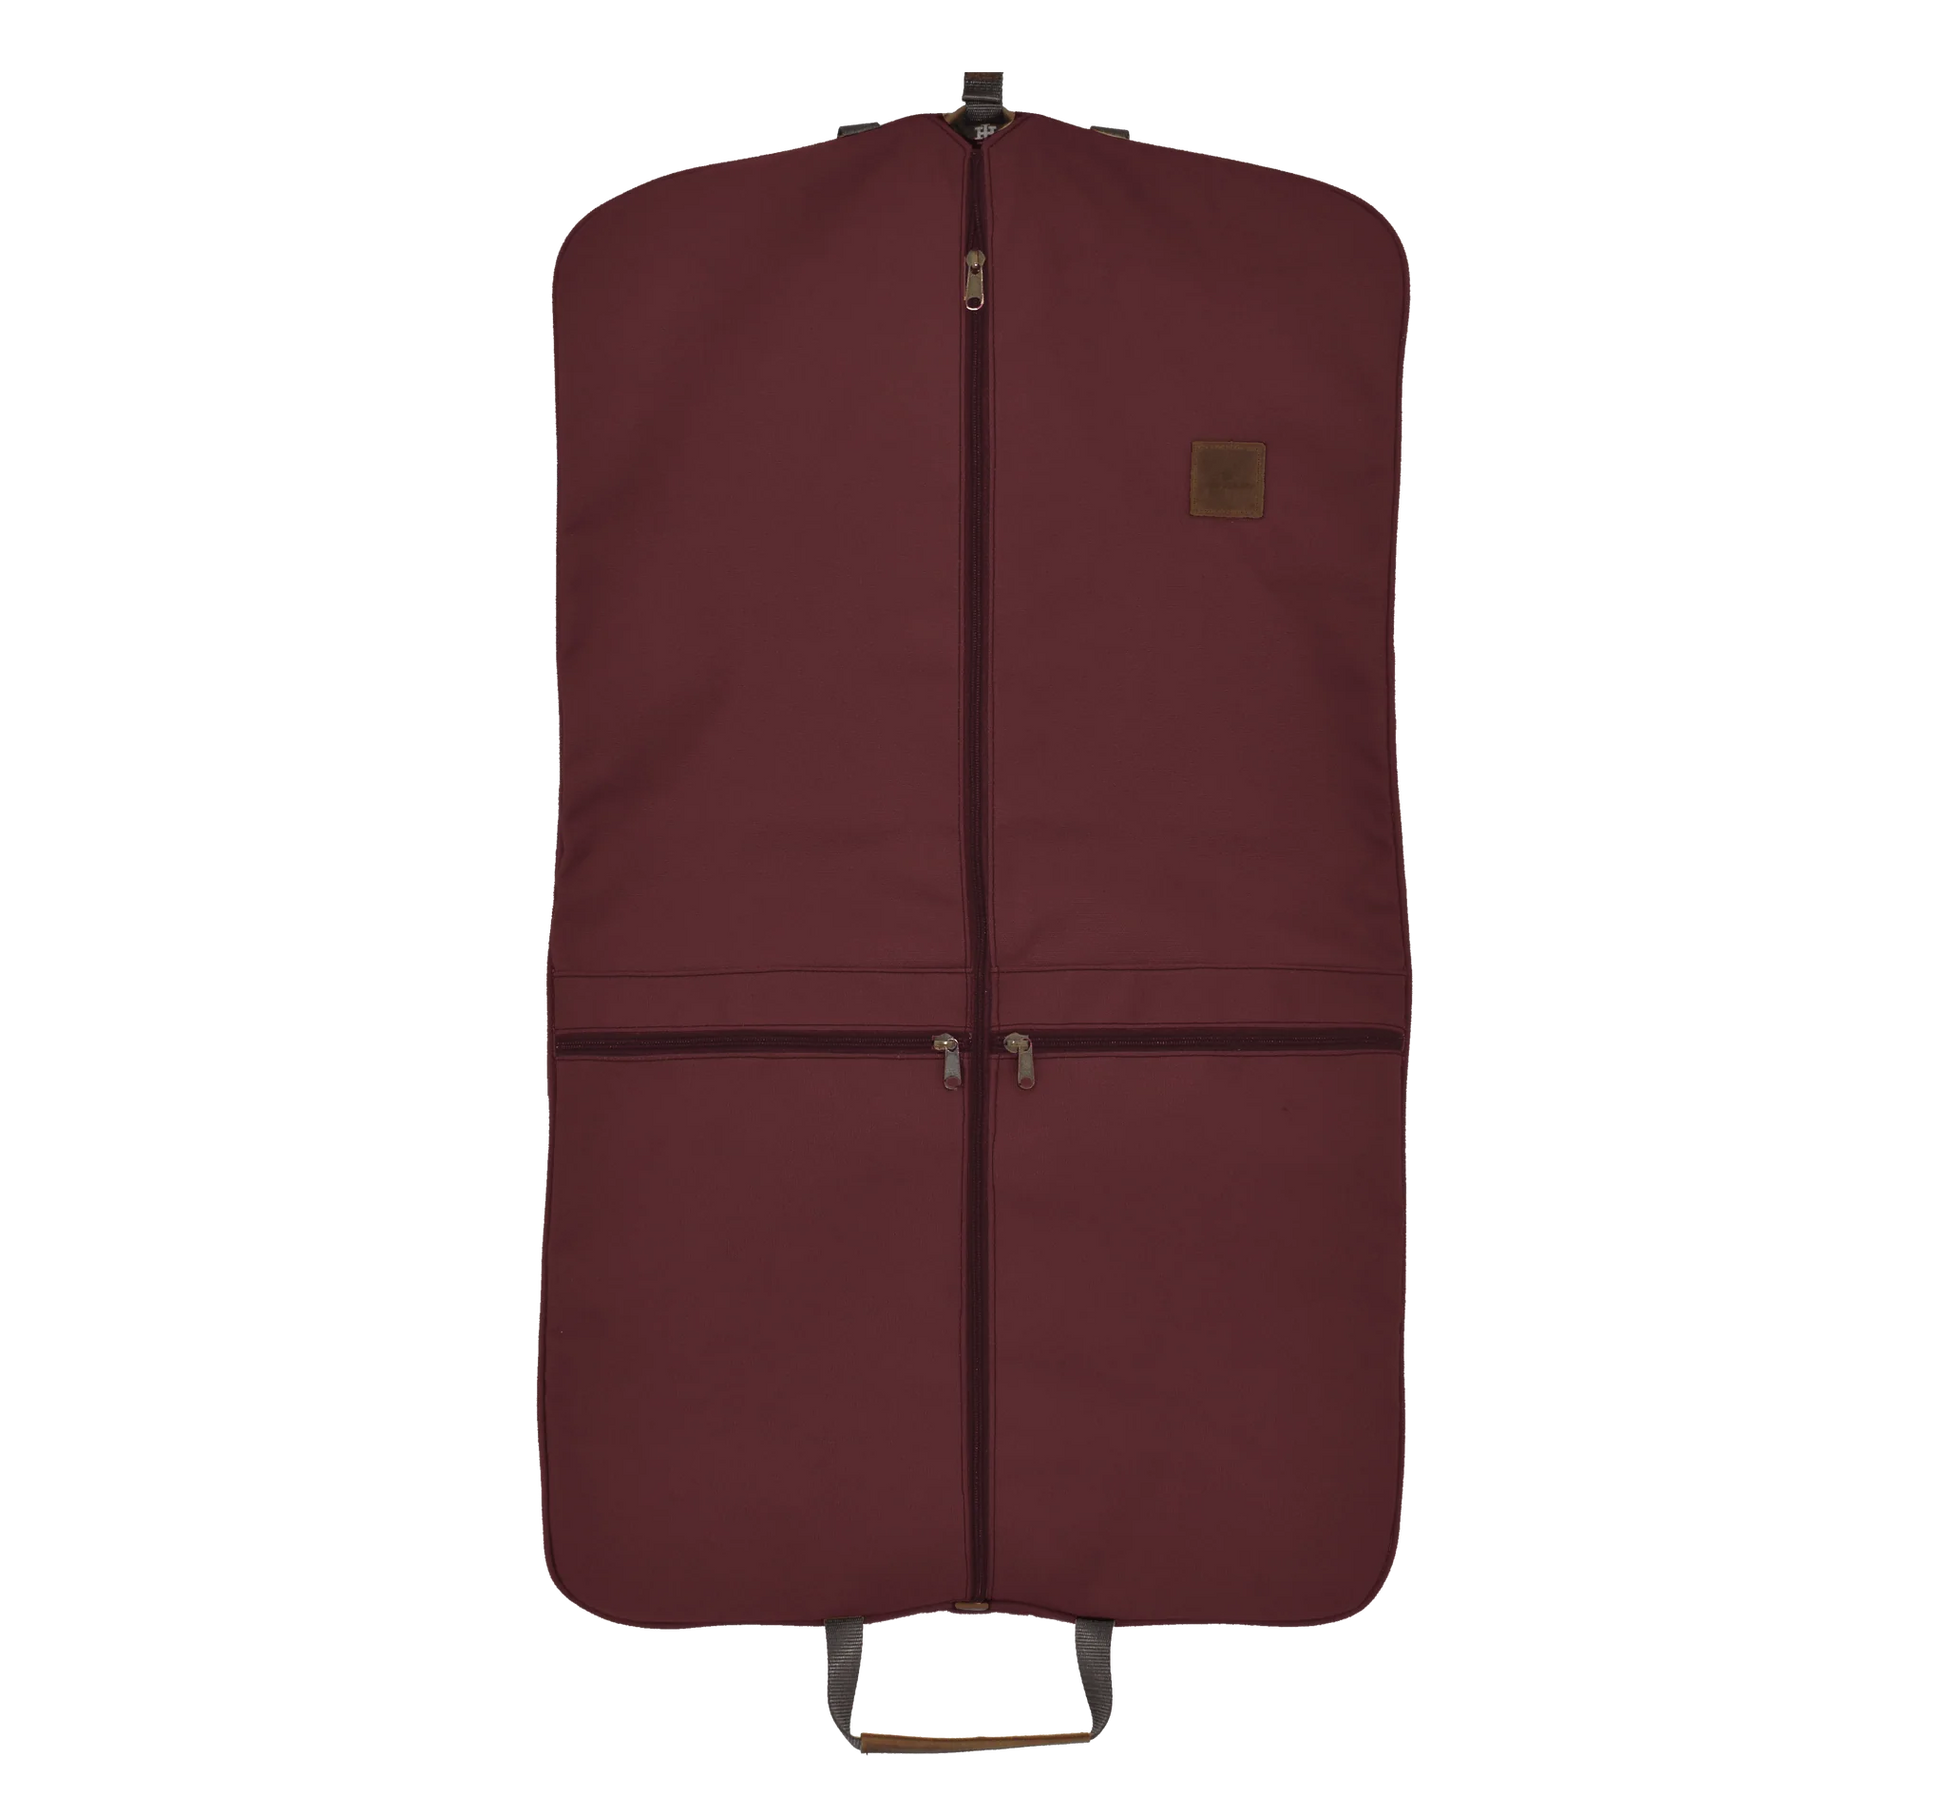 JH Two-Suiter (Order in any color!) Garment Bags Jon Hart Brick Cotton Canvas  